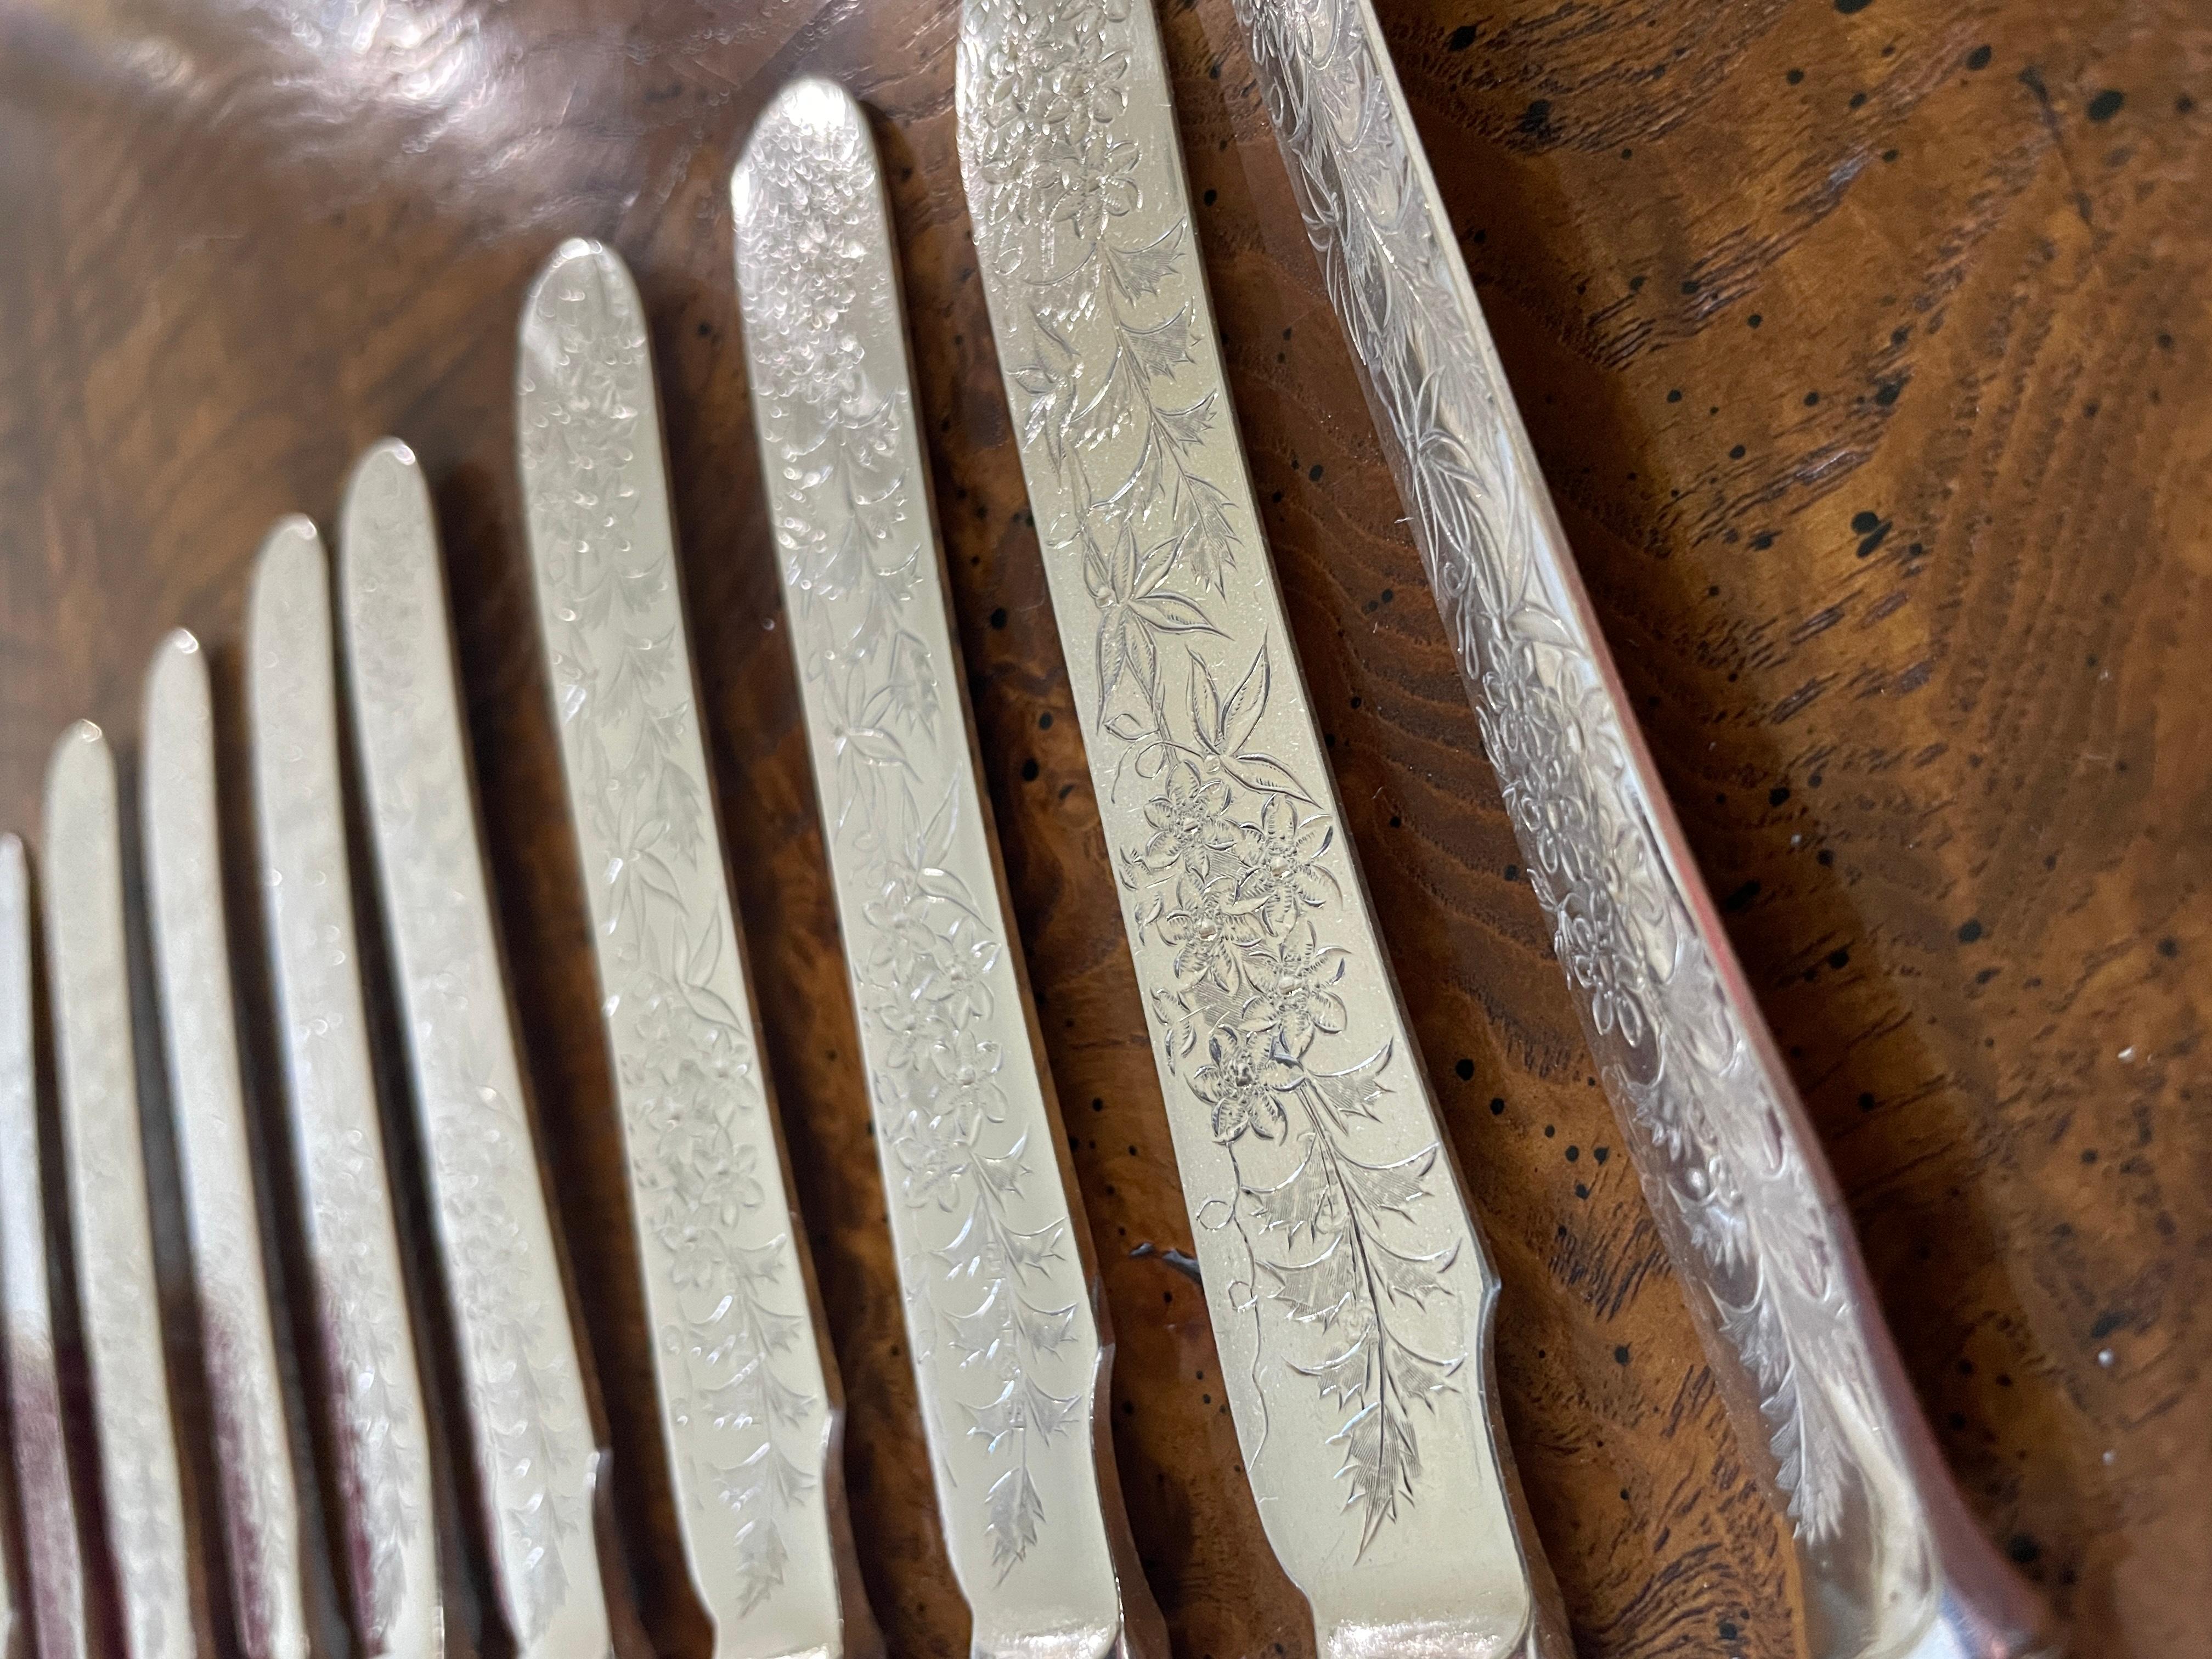 Ornate antique boxed set of Victorian silver plated flatware. This set features place setting for 18 people. This set was made circa 1890. The engraving on each piece is very intricate. Set comes in the original velvet lined box for safe keeping.